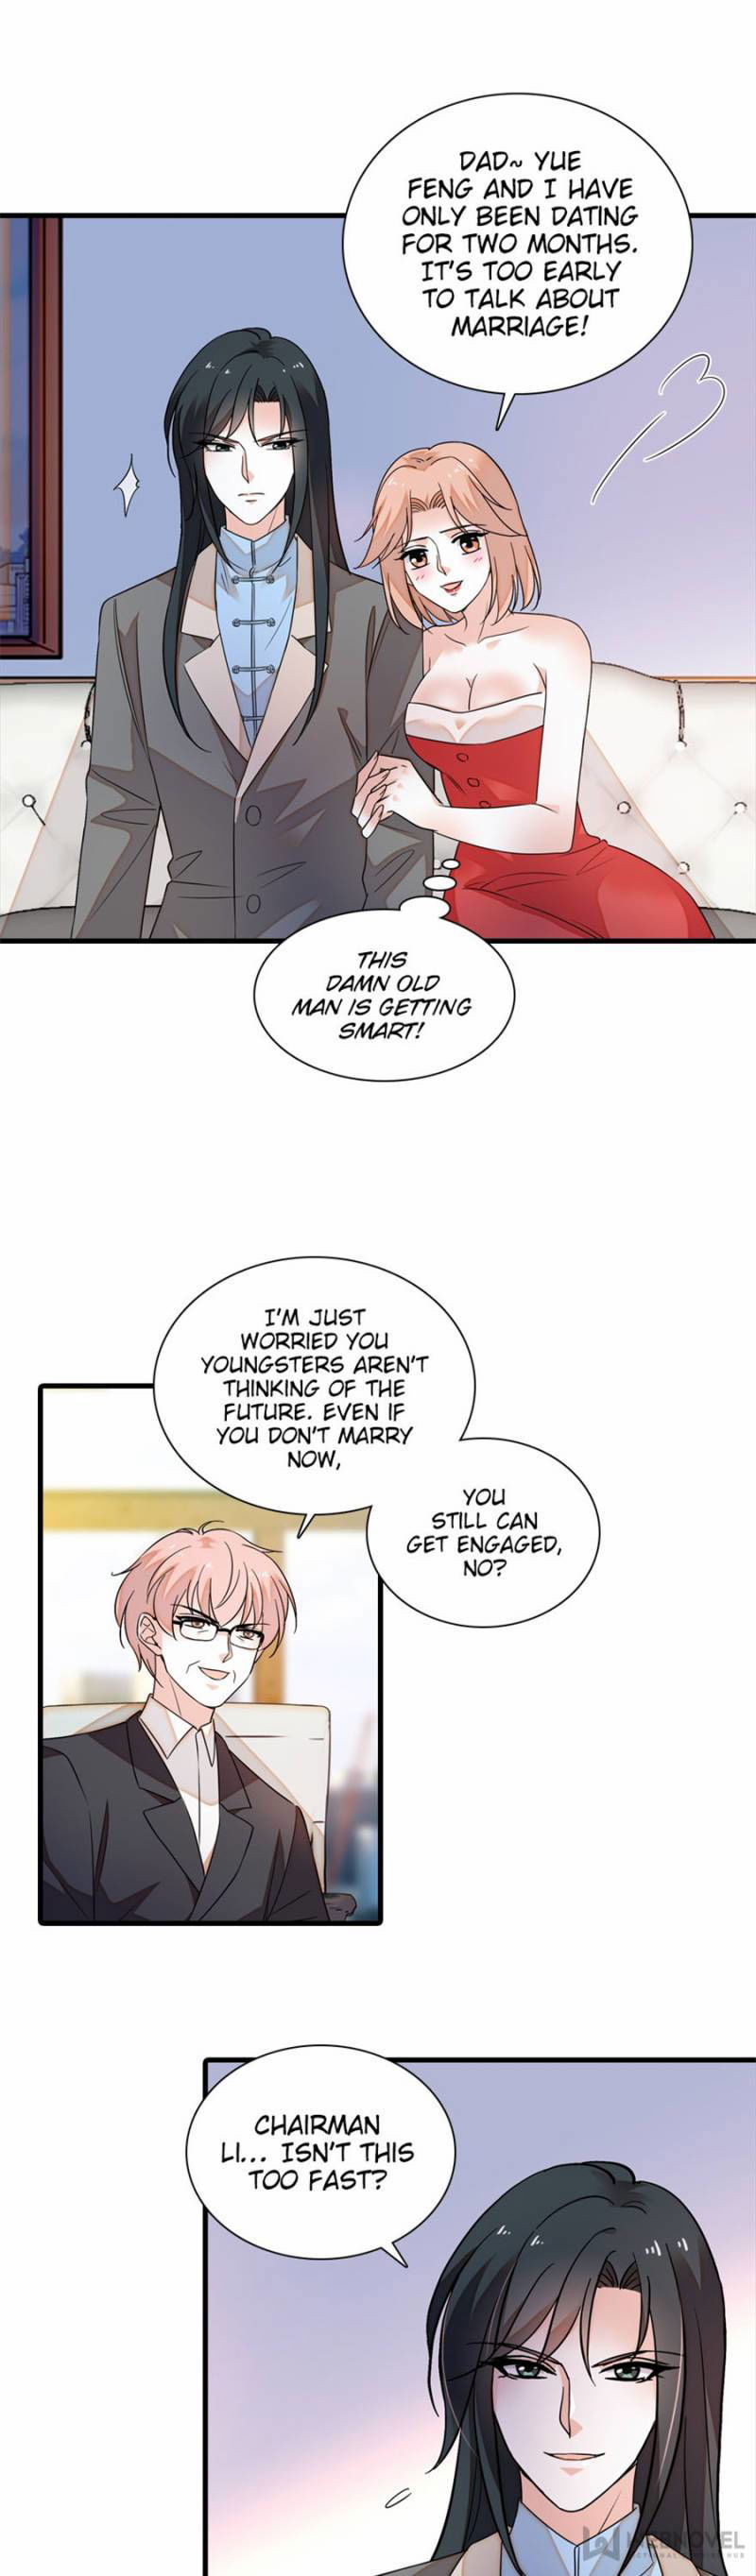 Sweetheart V5: The Boss Is Too Kind! Chapter 255 page 1